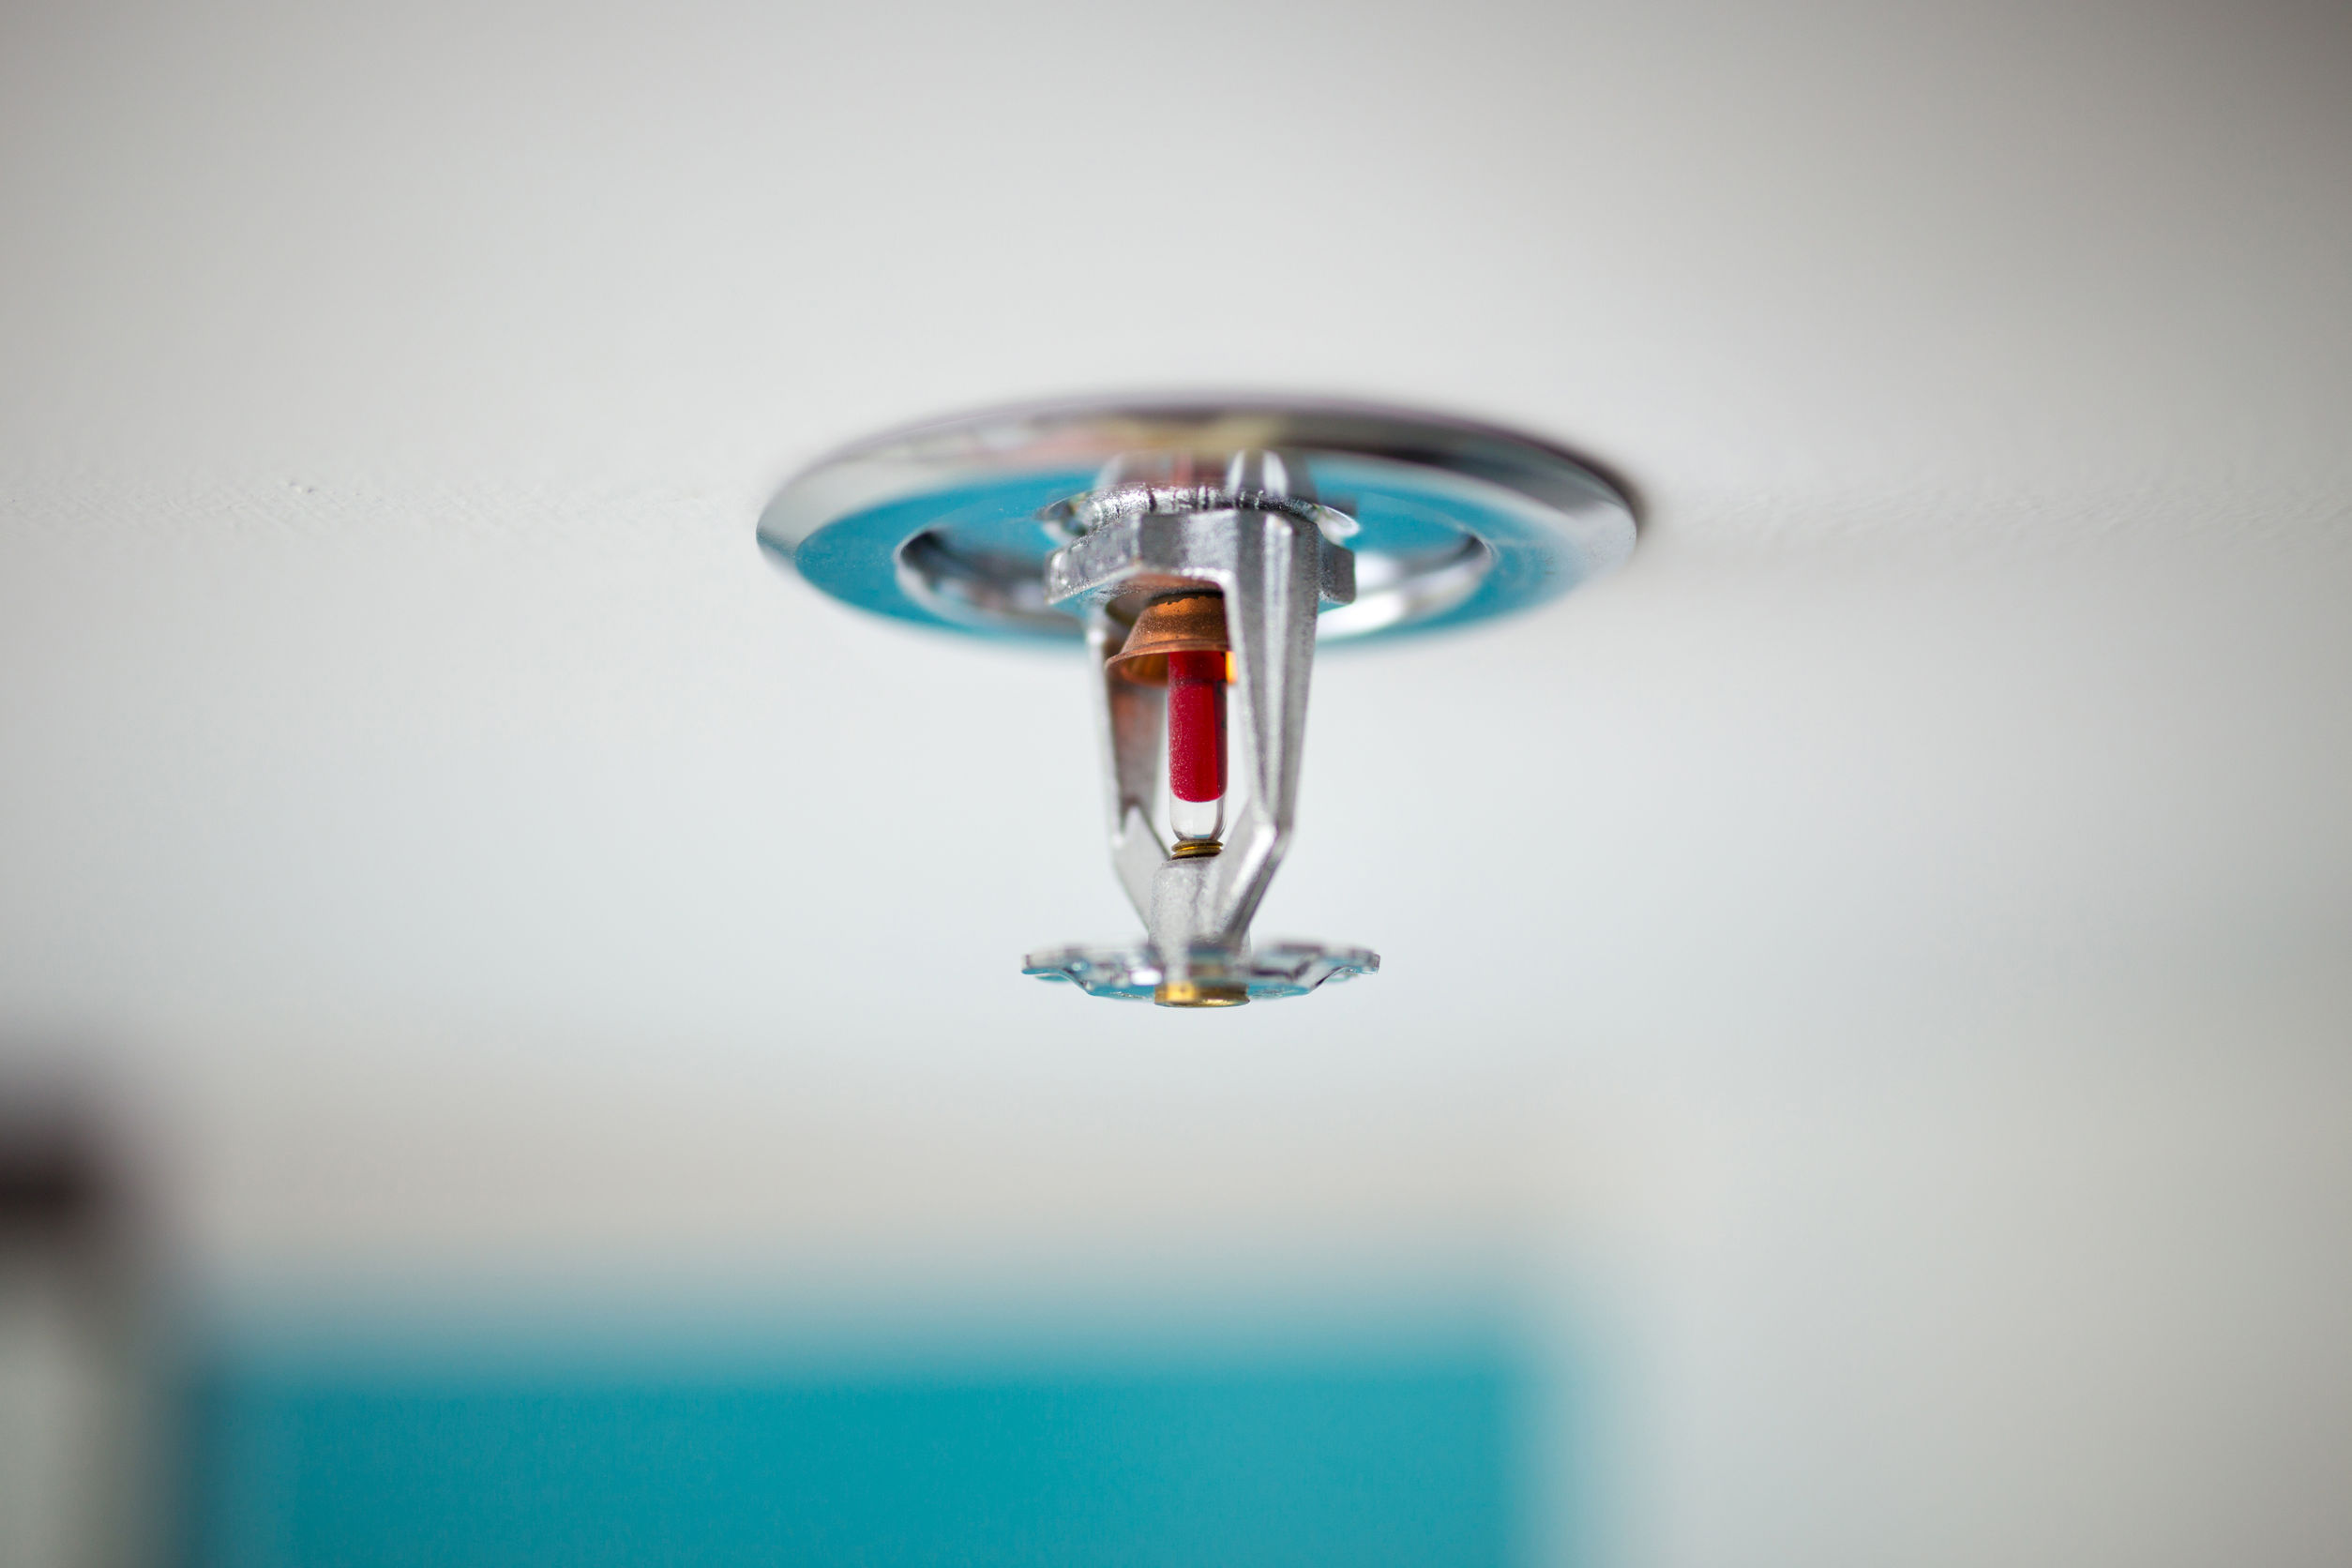 What You Should Know About Fire Suppression Inspections in Salt Lake City